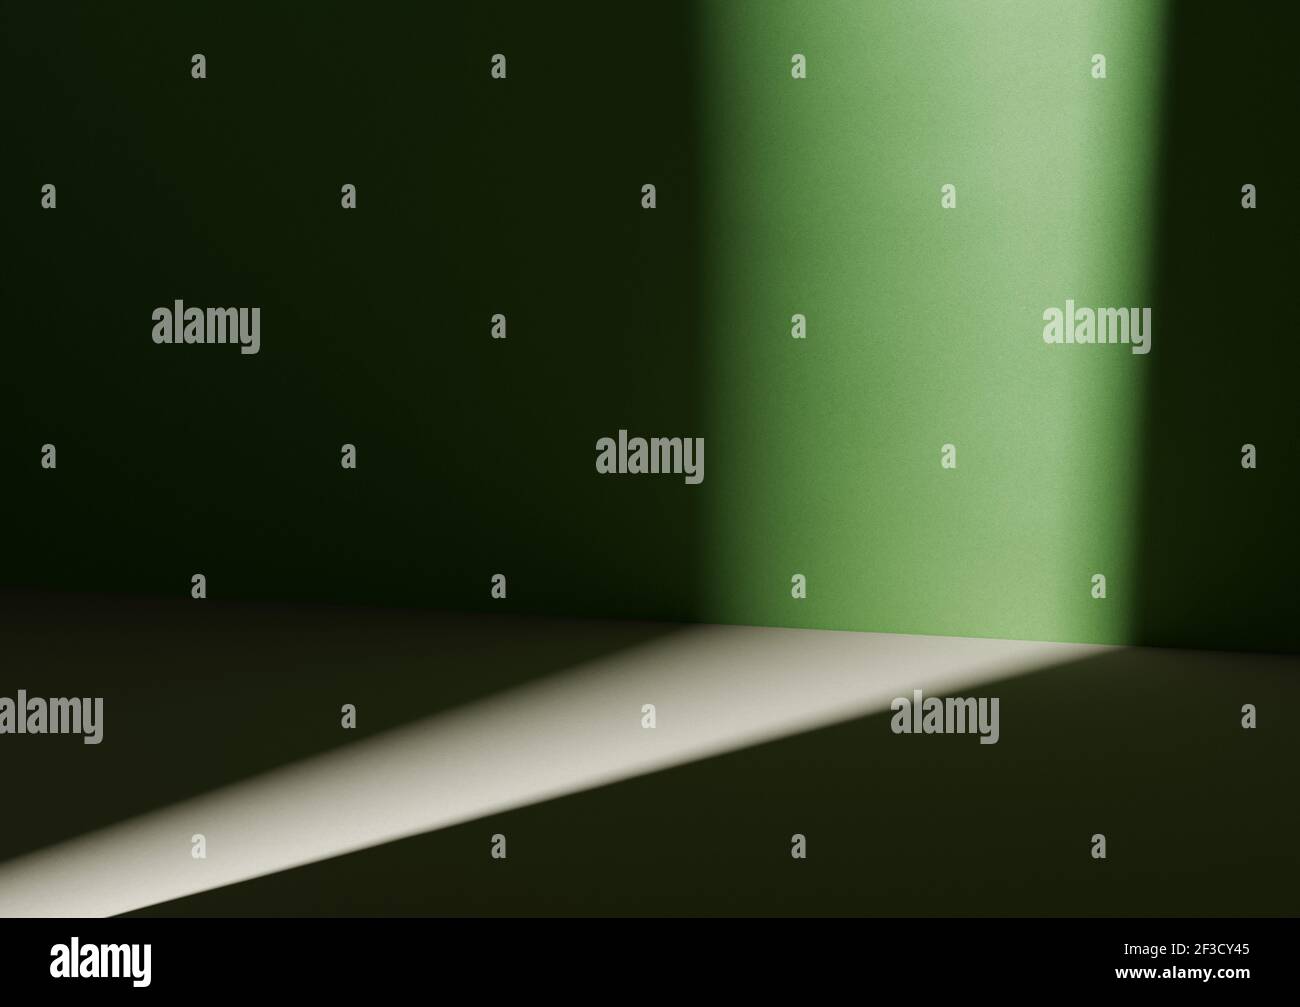 Thin stripe of light illuminating horizontally divided background. White and green. Computer rendering product background. Stock Photo